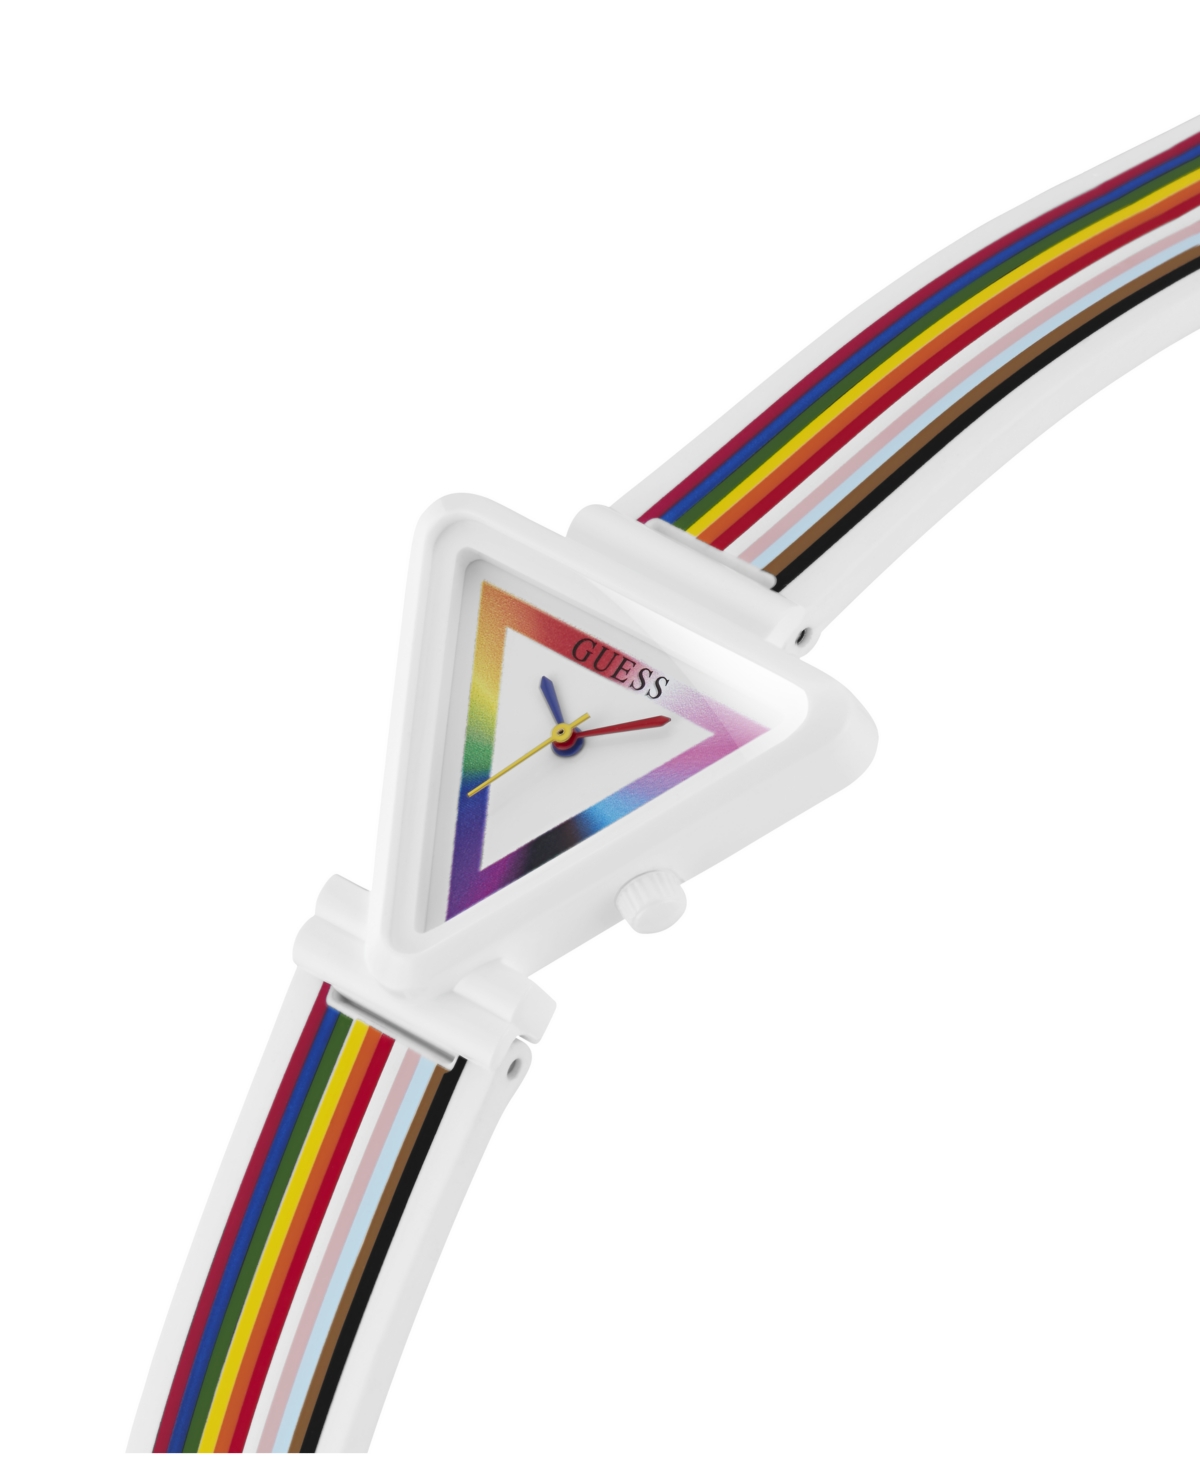 Shop Guess Women's Analog Rainbow Silicone Watch, 31mm